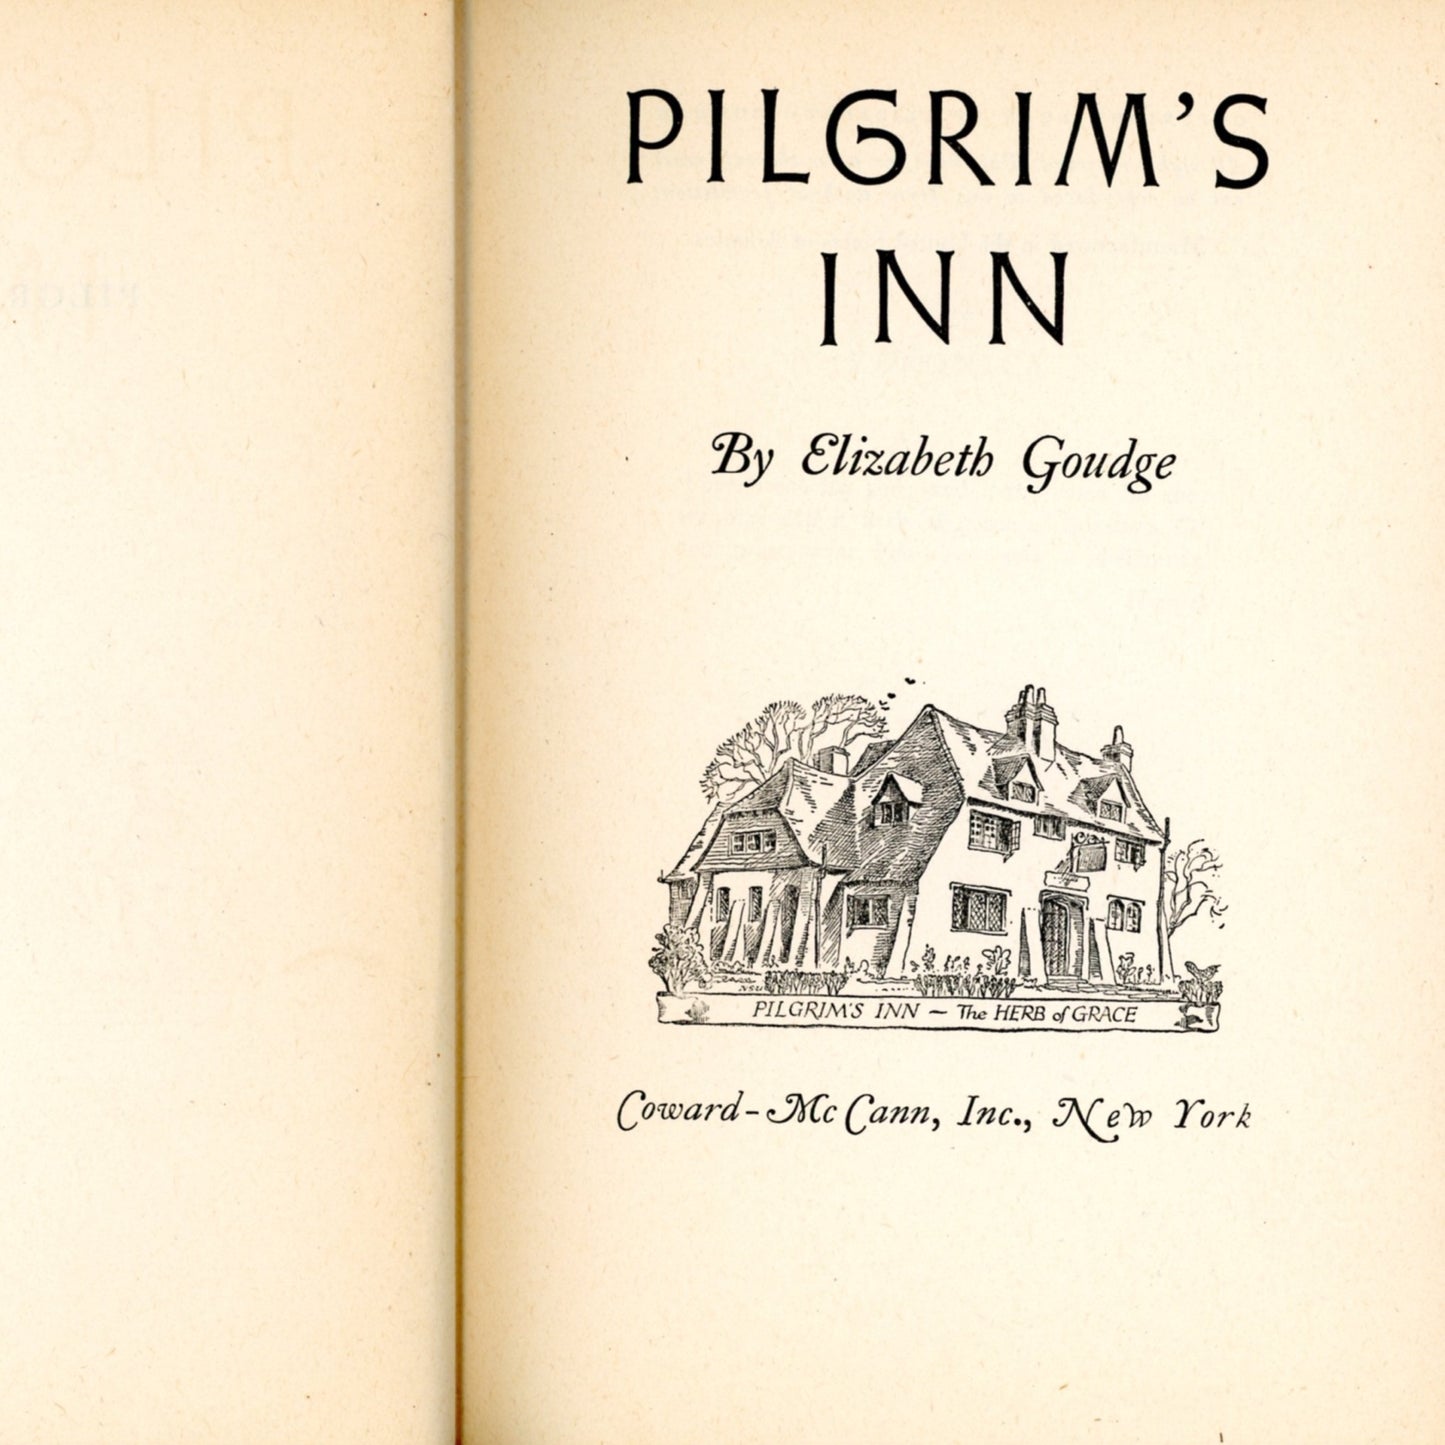 PILGRIM'S INN: The Herb of Grace by Elizabeth Goudge ©1948 First Edition